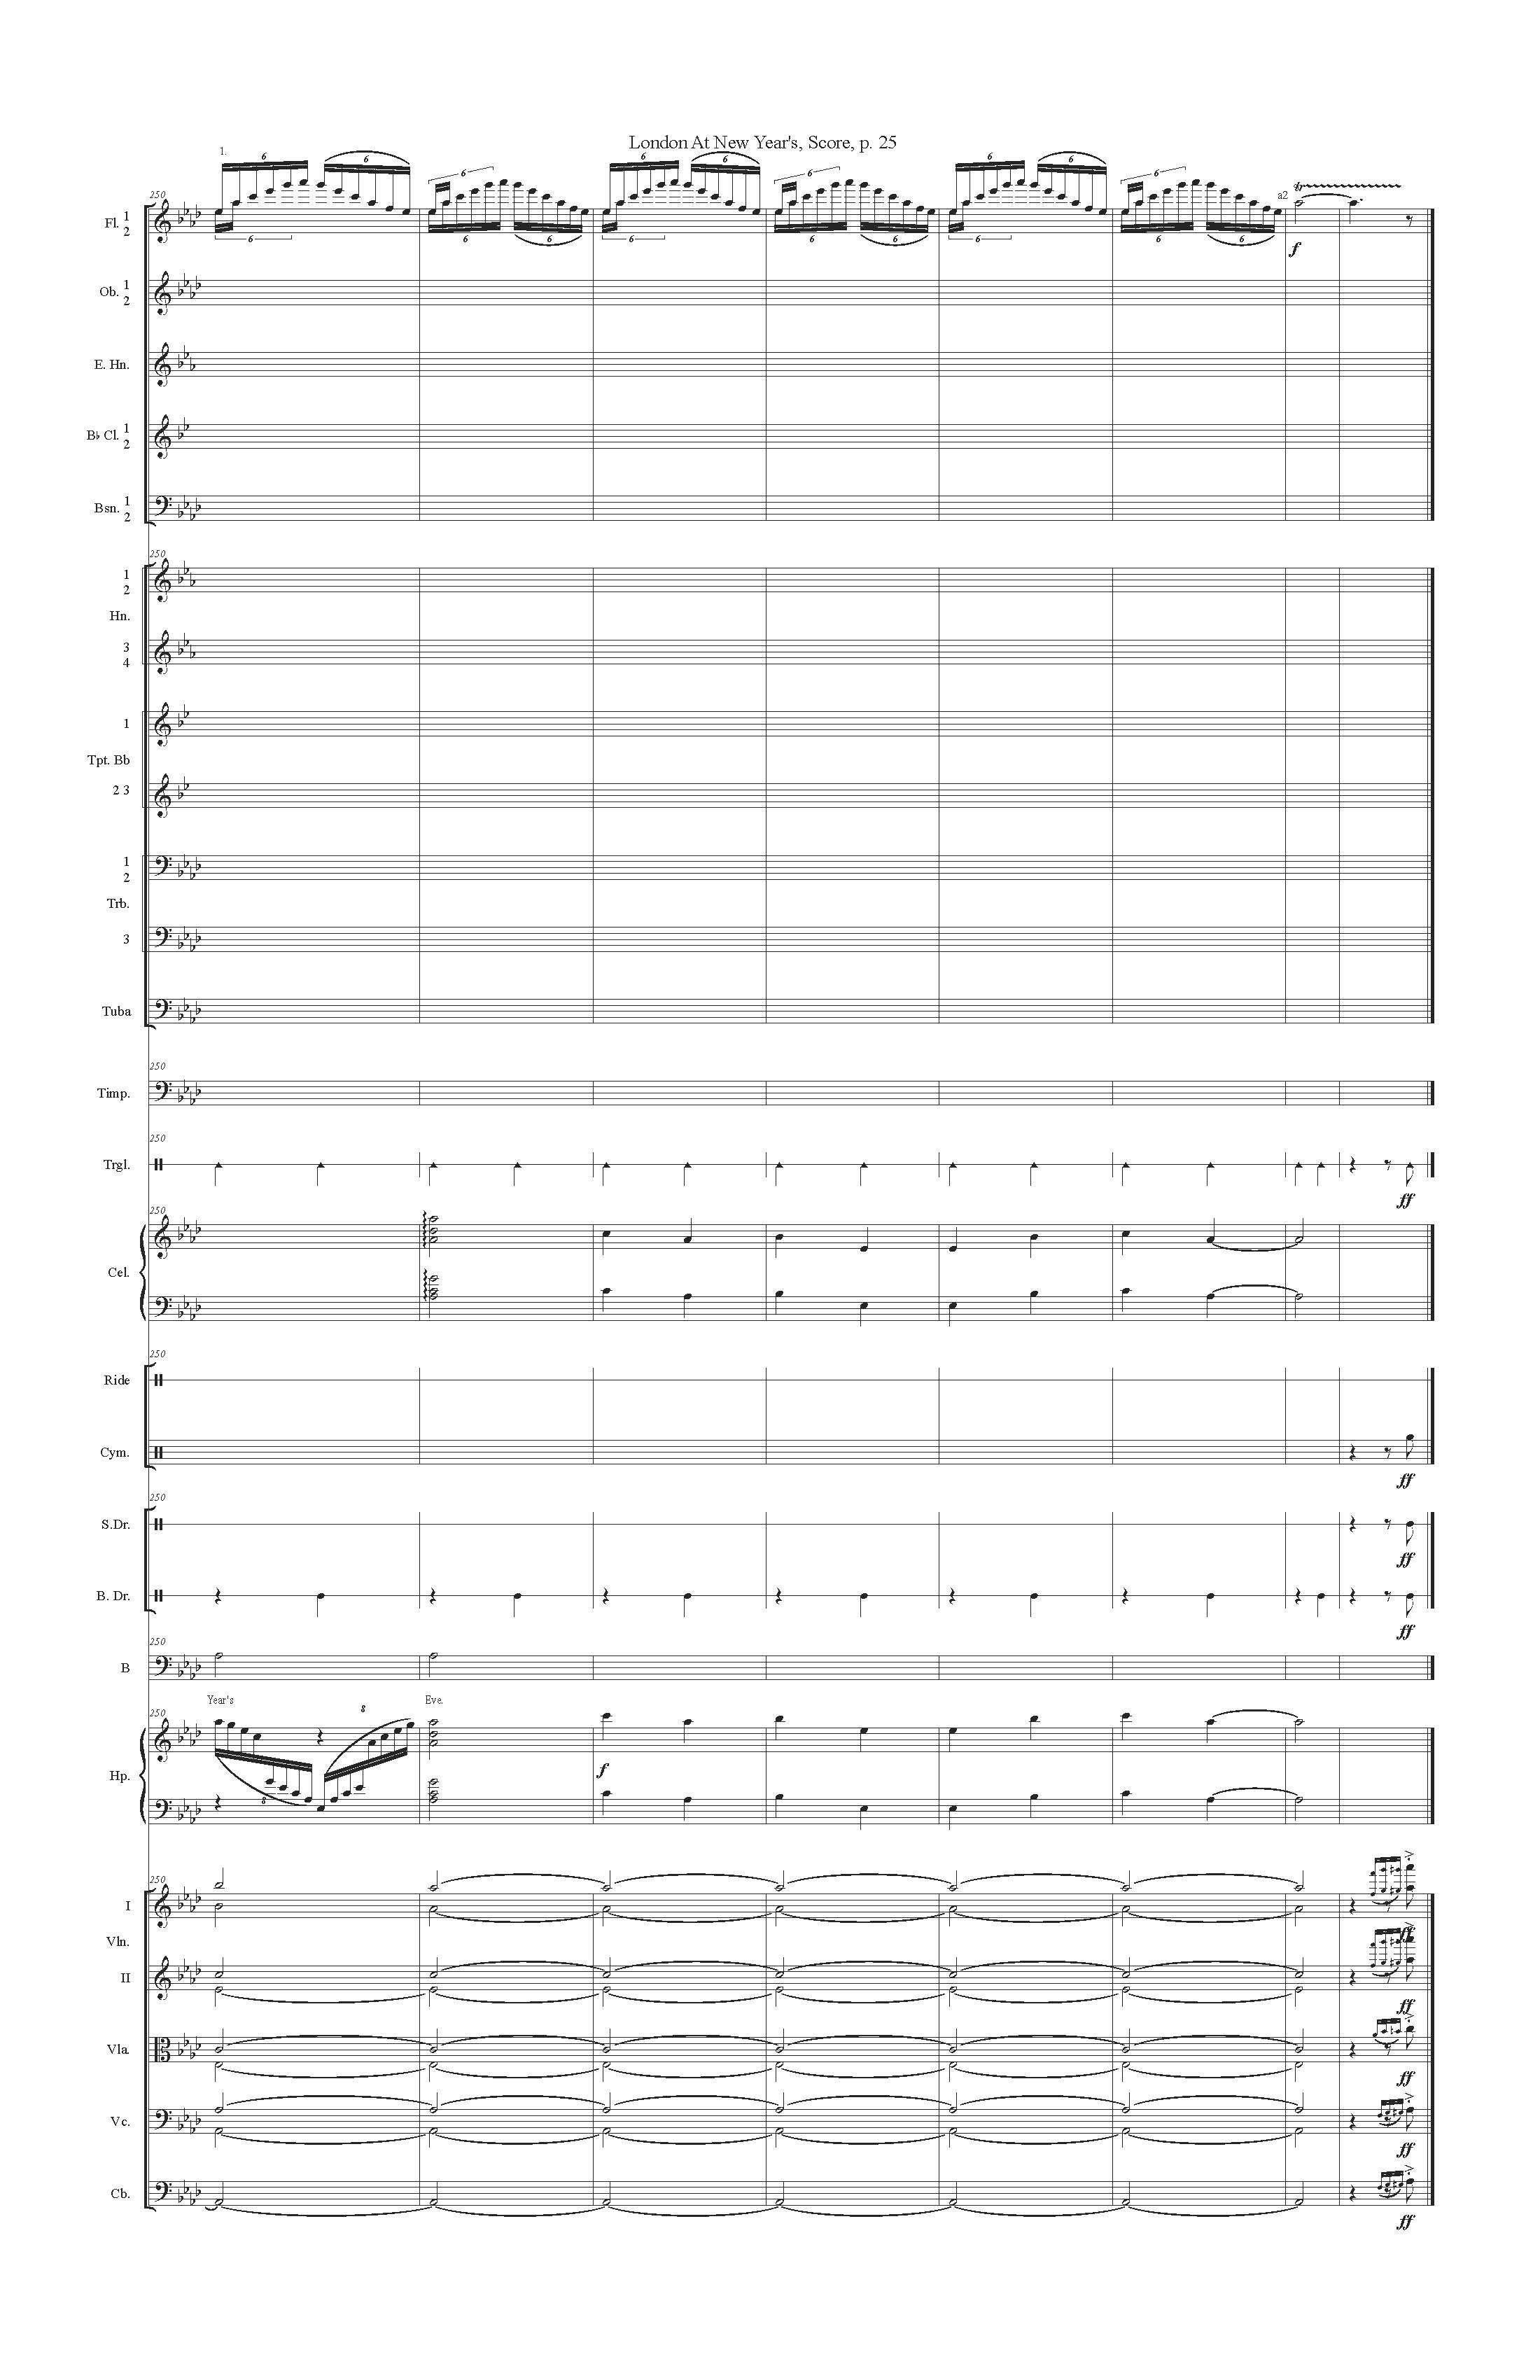 LONDON AT NEW YEARS ORCH - Score_Page_25.jpg